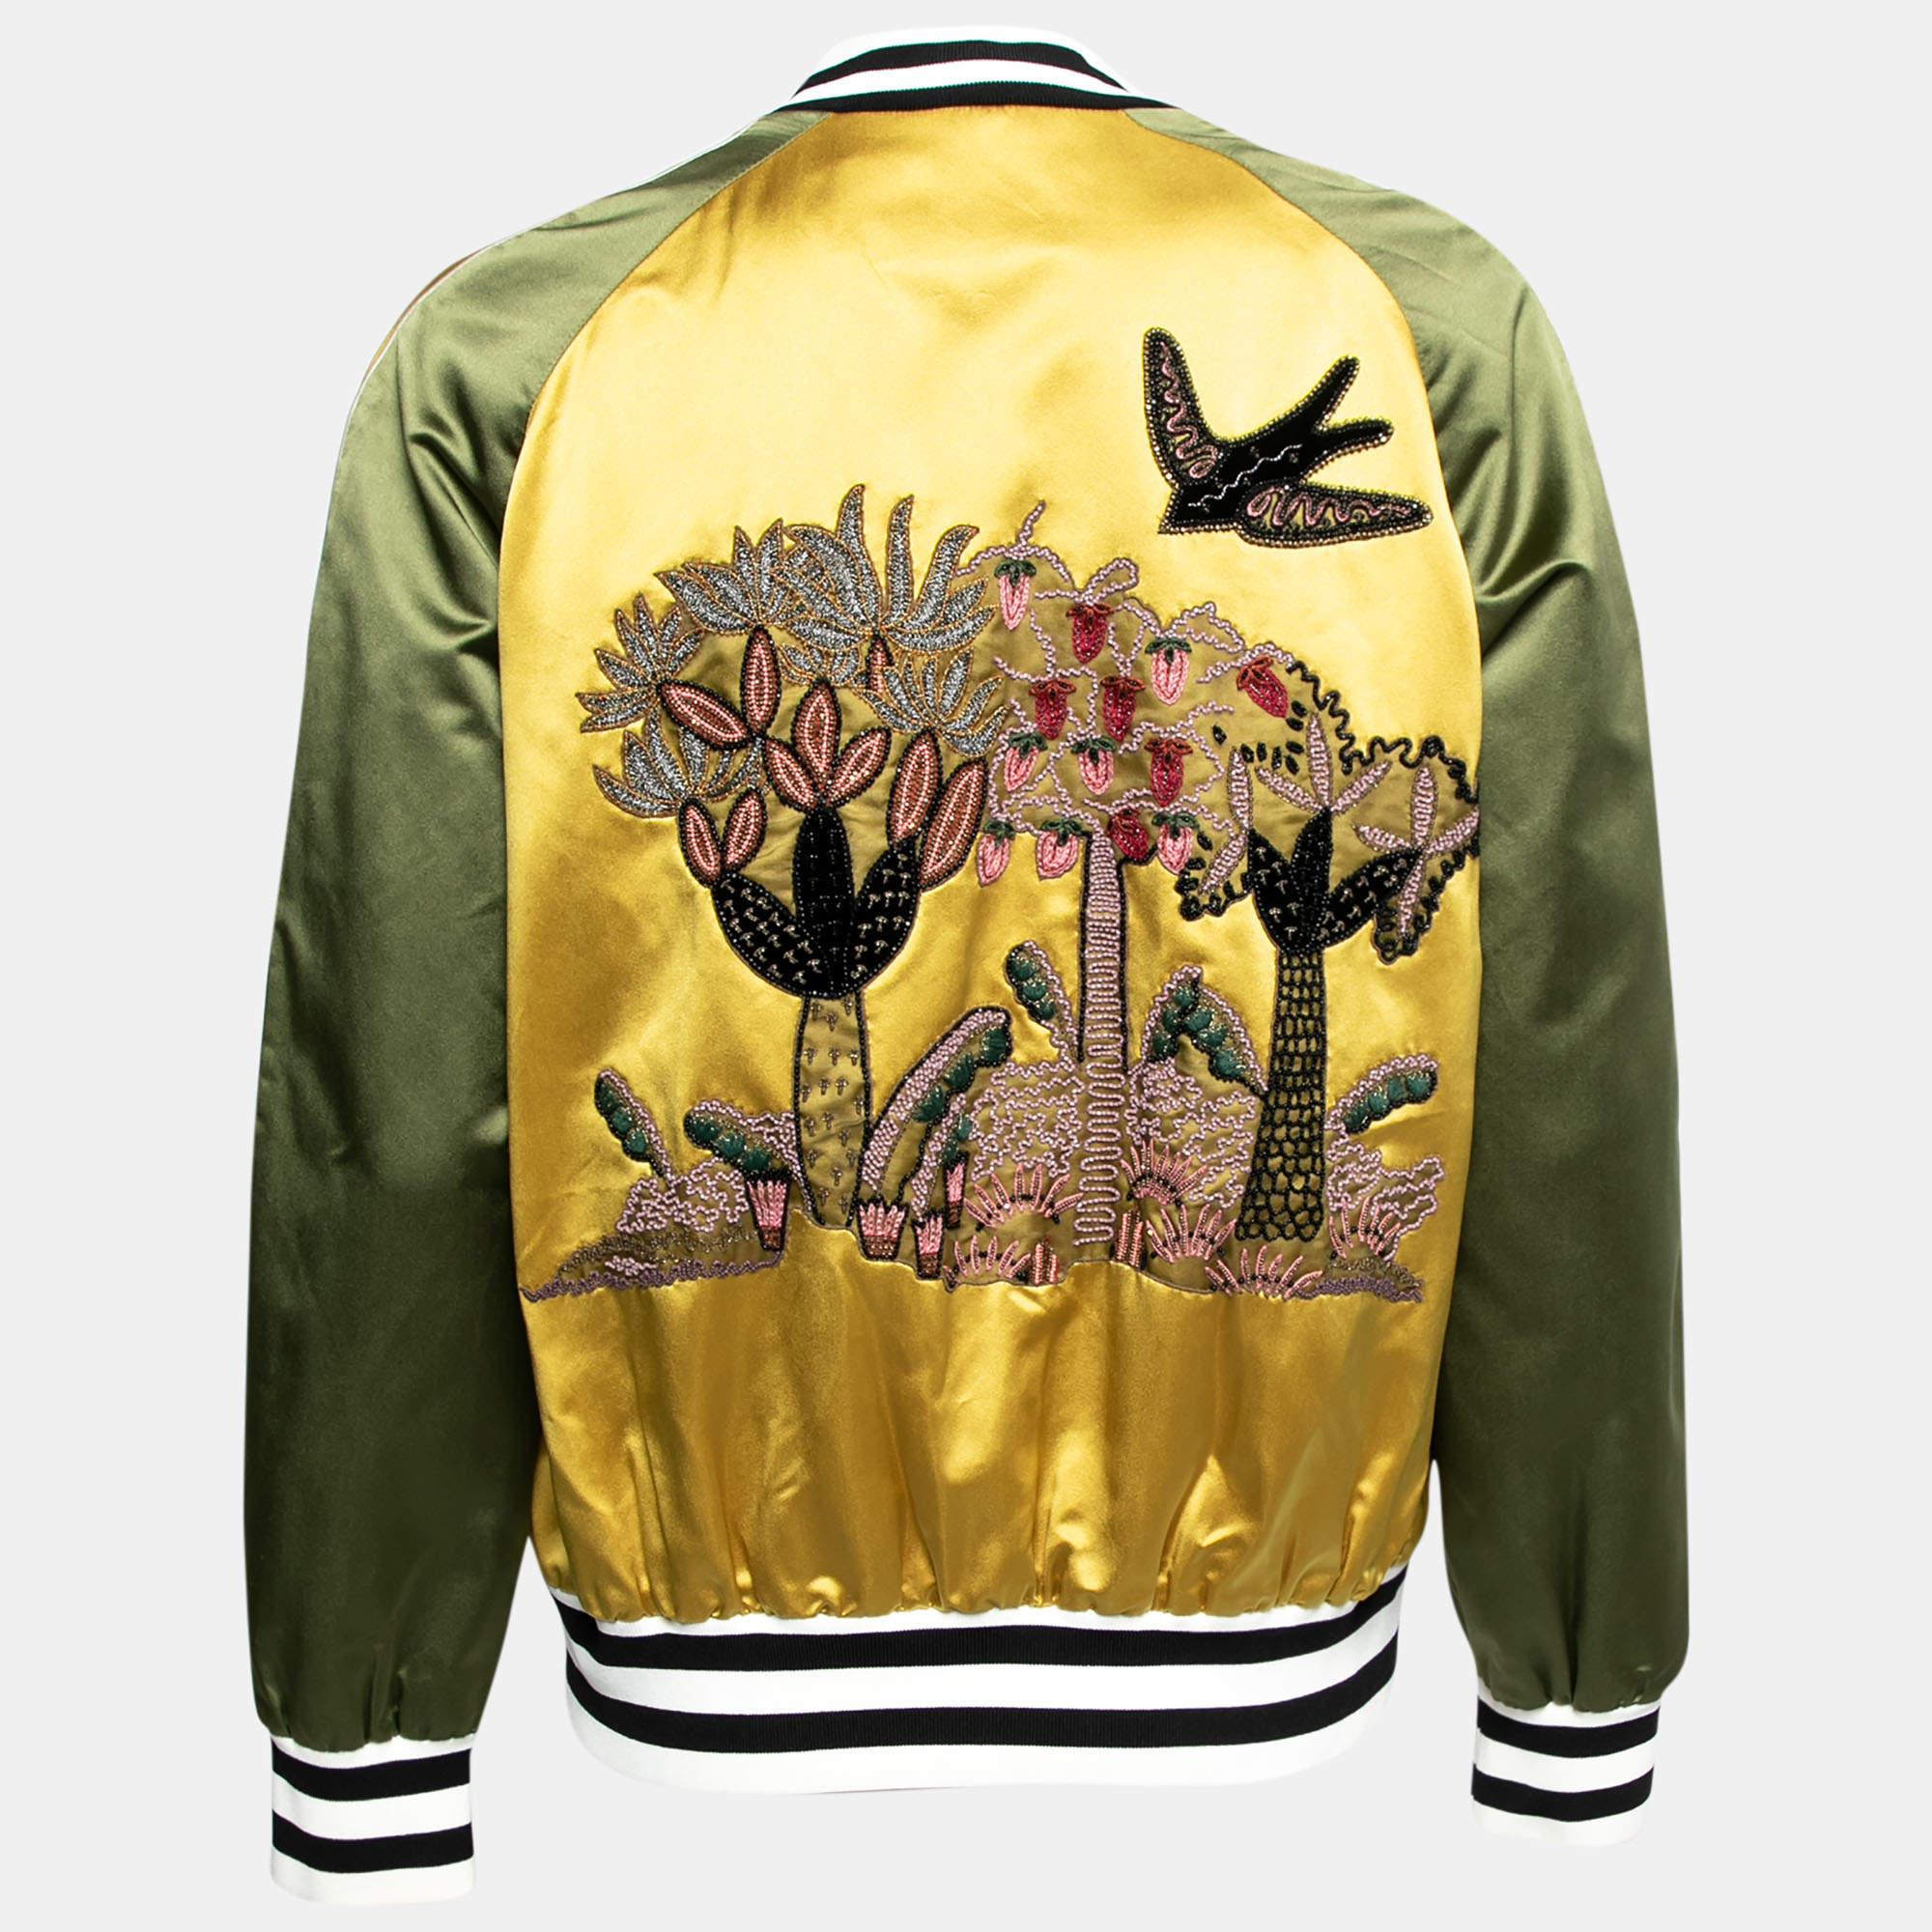 This Bomber jacket from the House of Valentino will help you sport a dapper style. It is designed using yellow-green silk satin fabric, which is augmented with embroidered patches. It has long sleeves, a zipper fastening, and two pockets. This